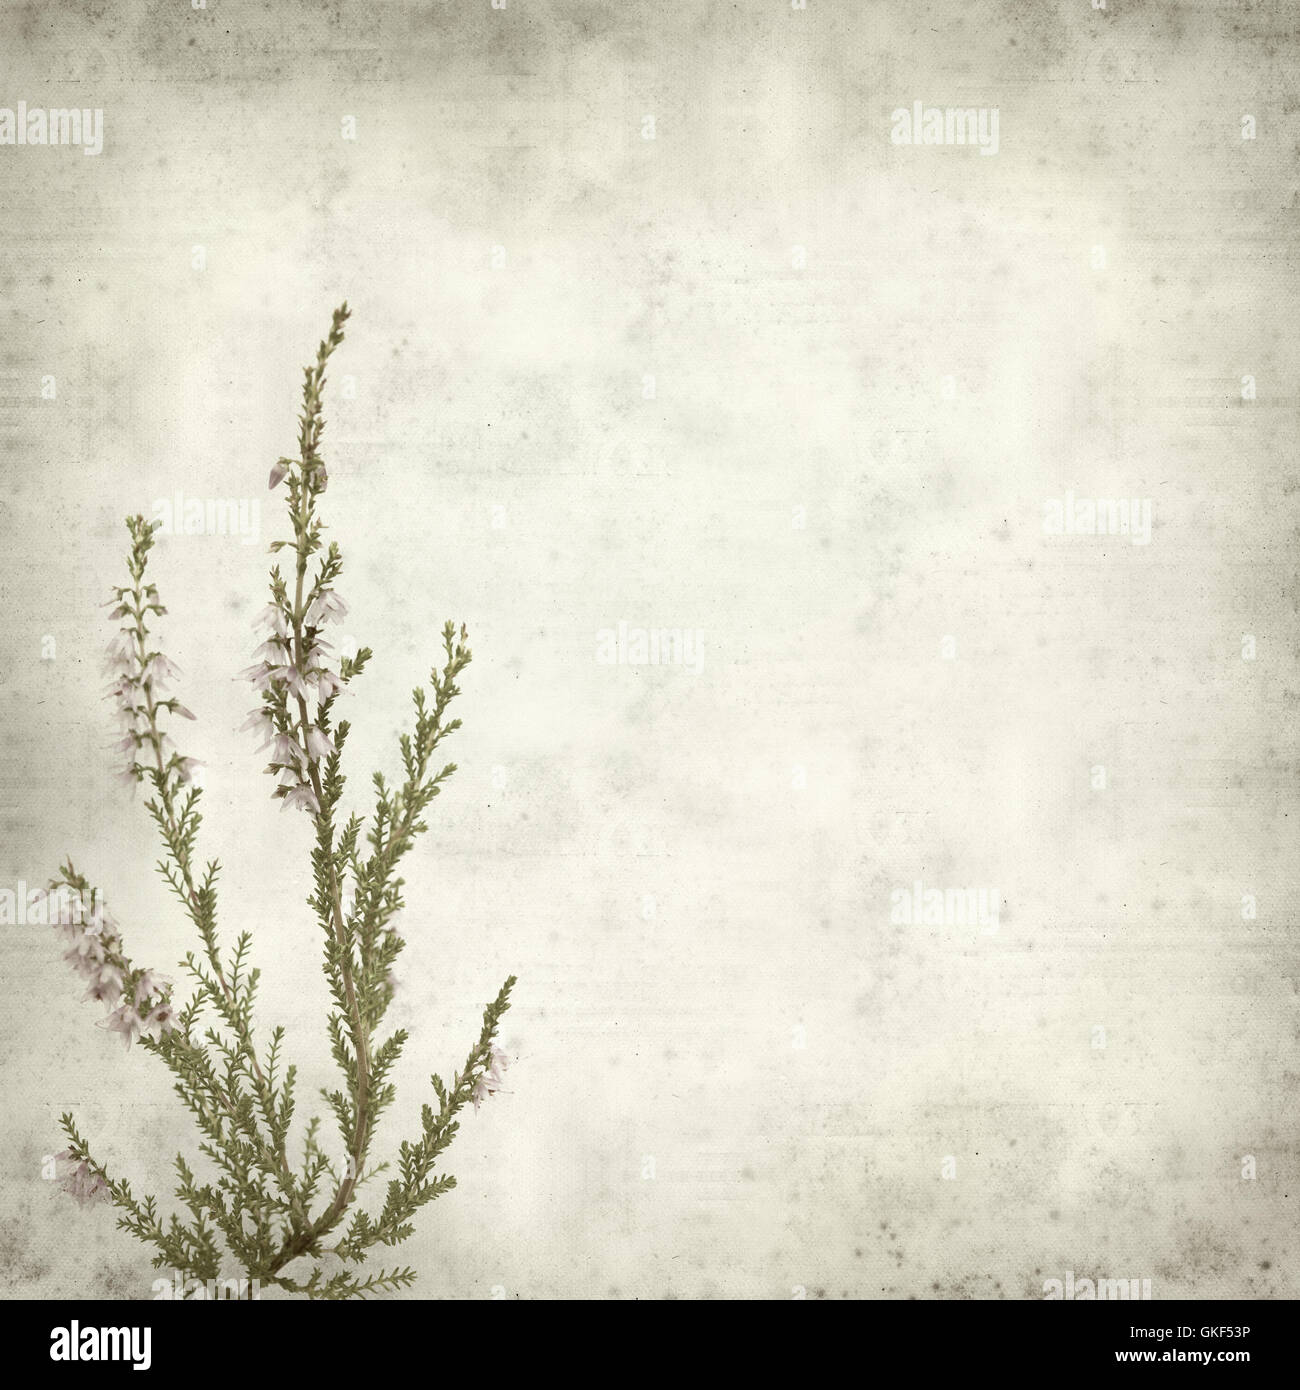 textured old paper background with pink heather flowers Stock Photo